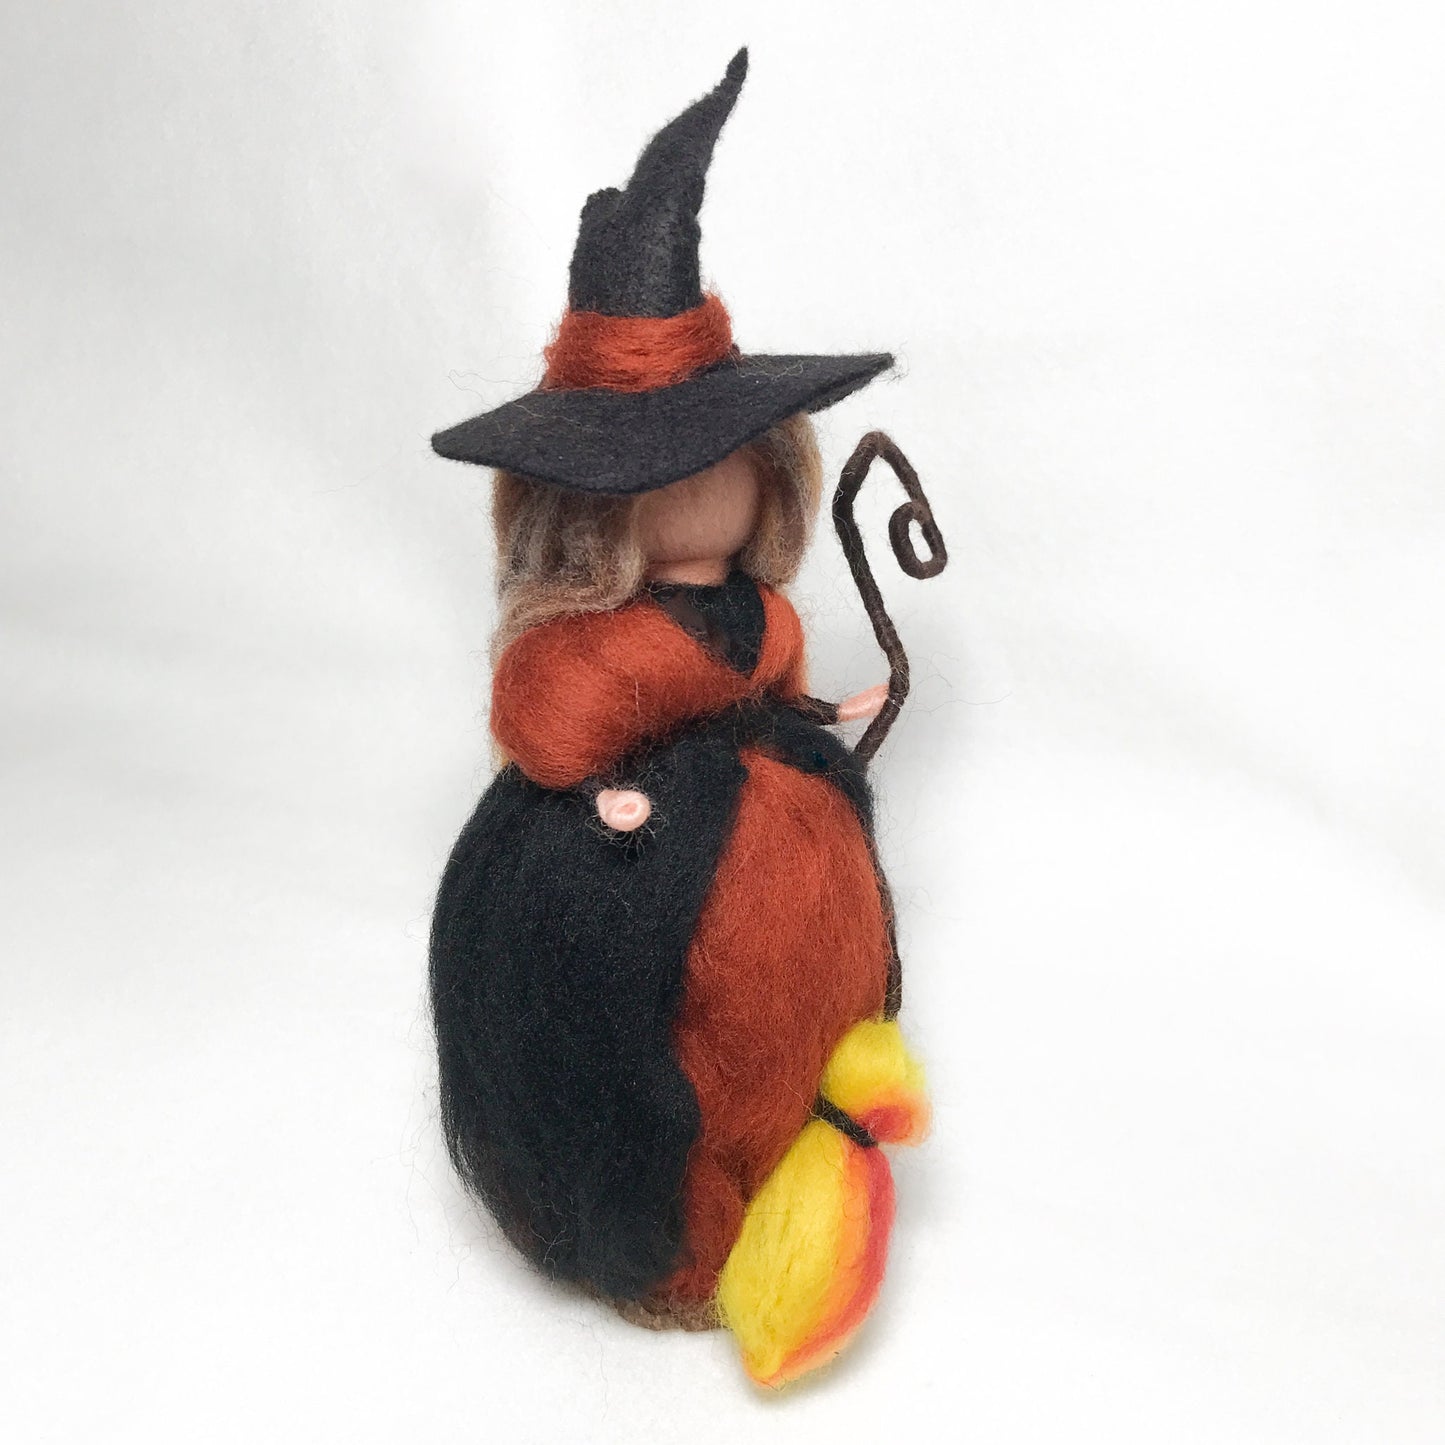 Wise Autumn Witch with a fire broom, by Rachel Mack